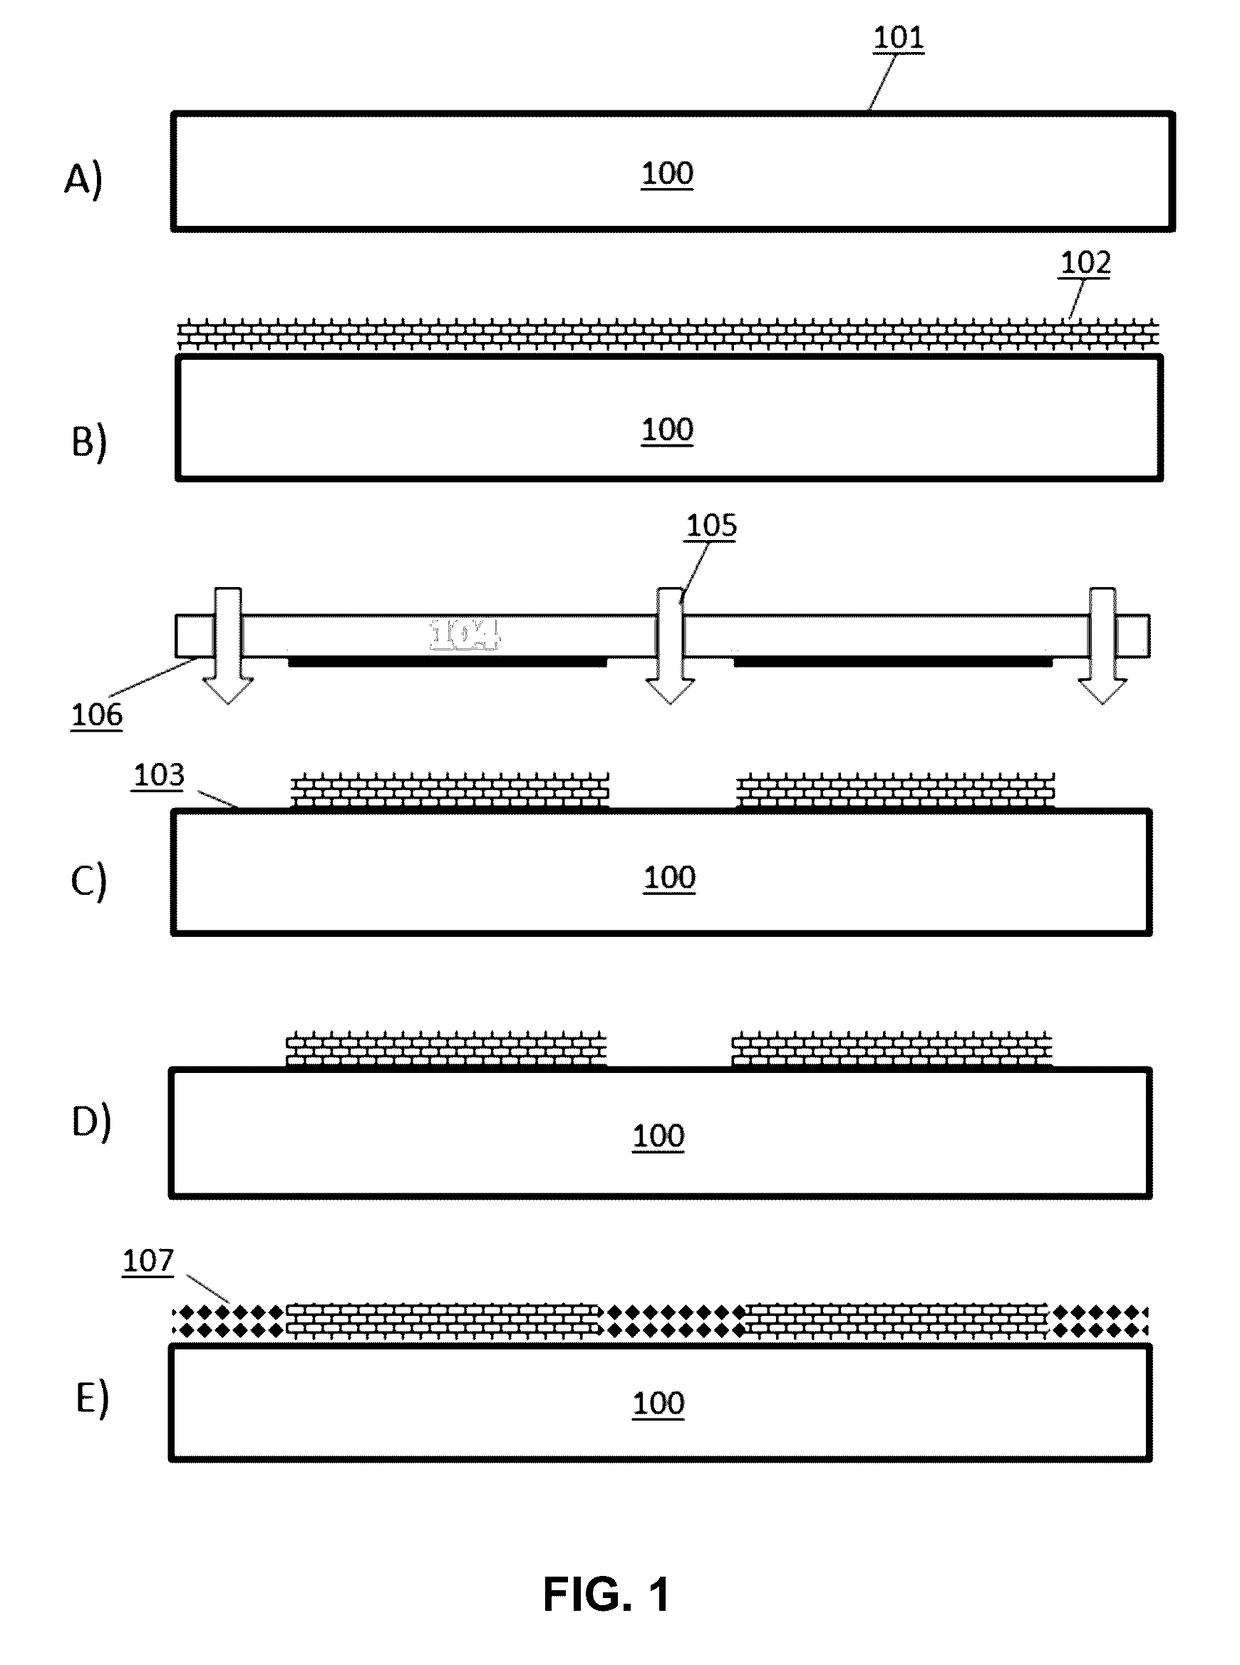 Functionalized surfaces and preparation thereof